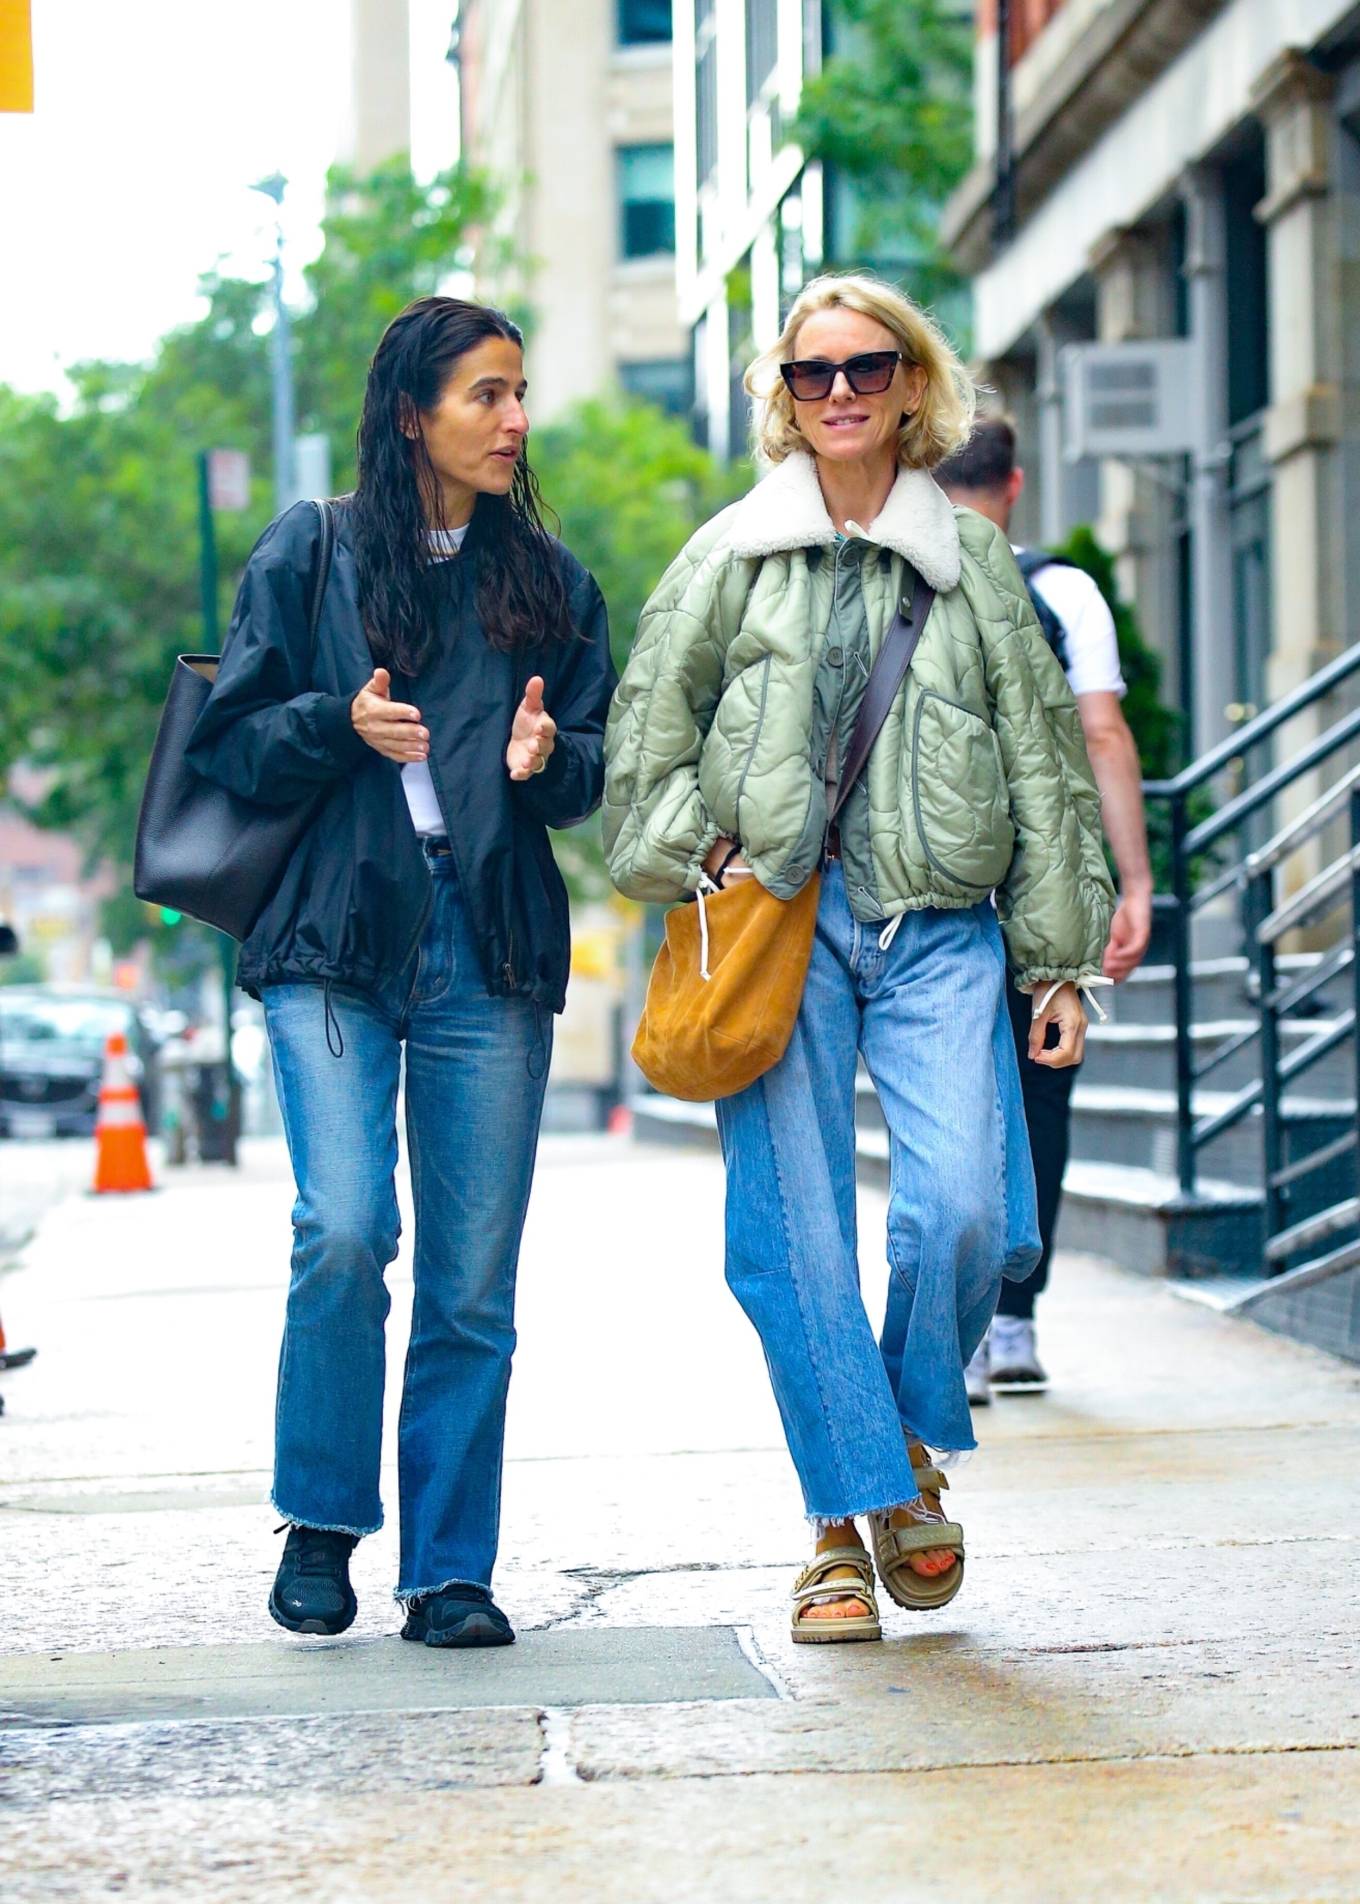 Naomi Watts - Spotted while out for a morning stroll with a friend in New York